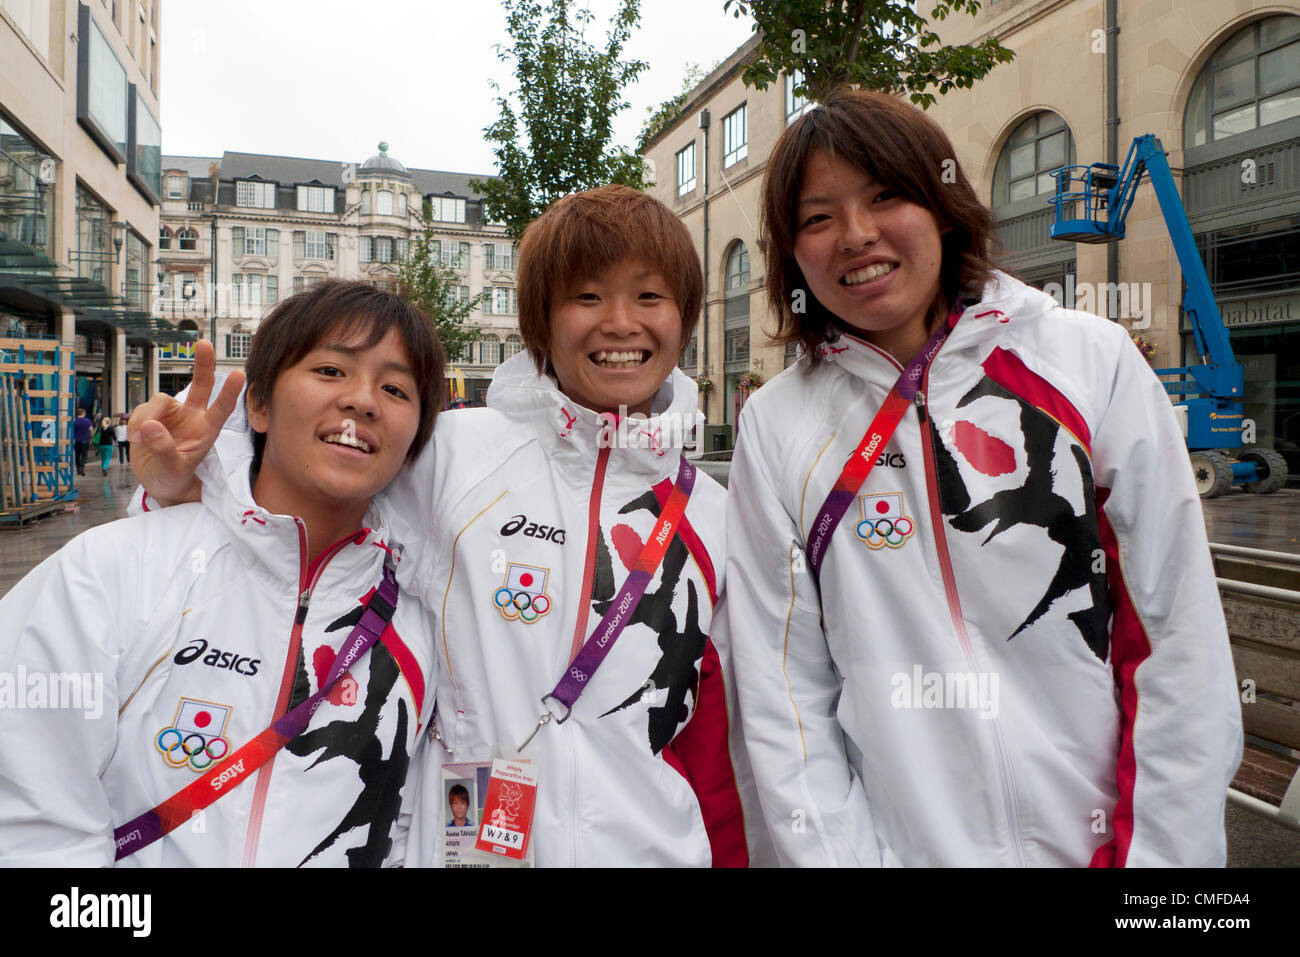 Aug. 2 2012 - Cardiff, Wales, UK - Members of the Japanese women's football team l.to r. Mana Iwabuchi, Asuna Tanaka and Saki Kumagai in Cardiff City Centre one day prior to their game against Brazil in the Women's Quarter finals at the Millennium Stadium in the 2012 London Olympics  KATHY DEWITT Stock Photo